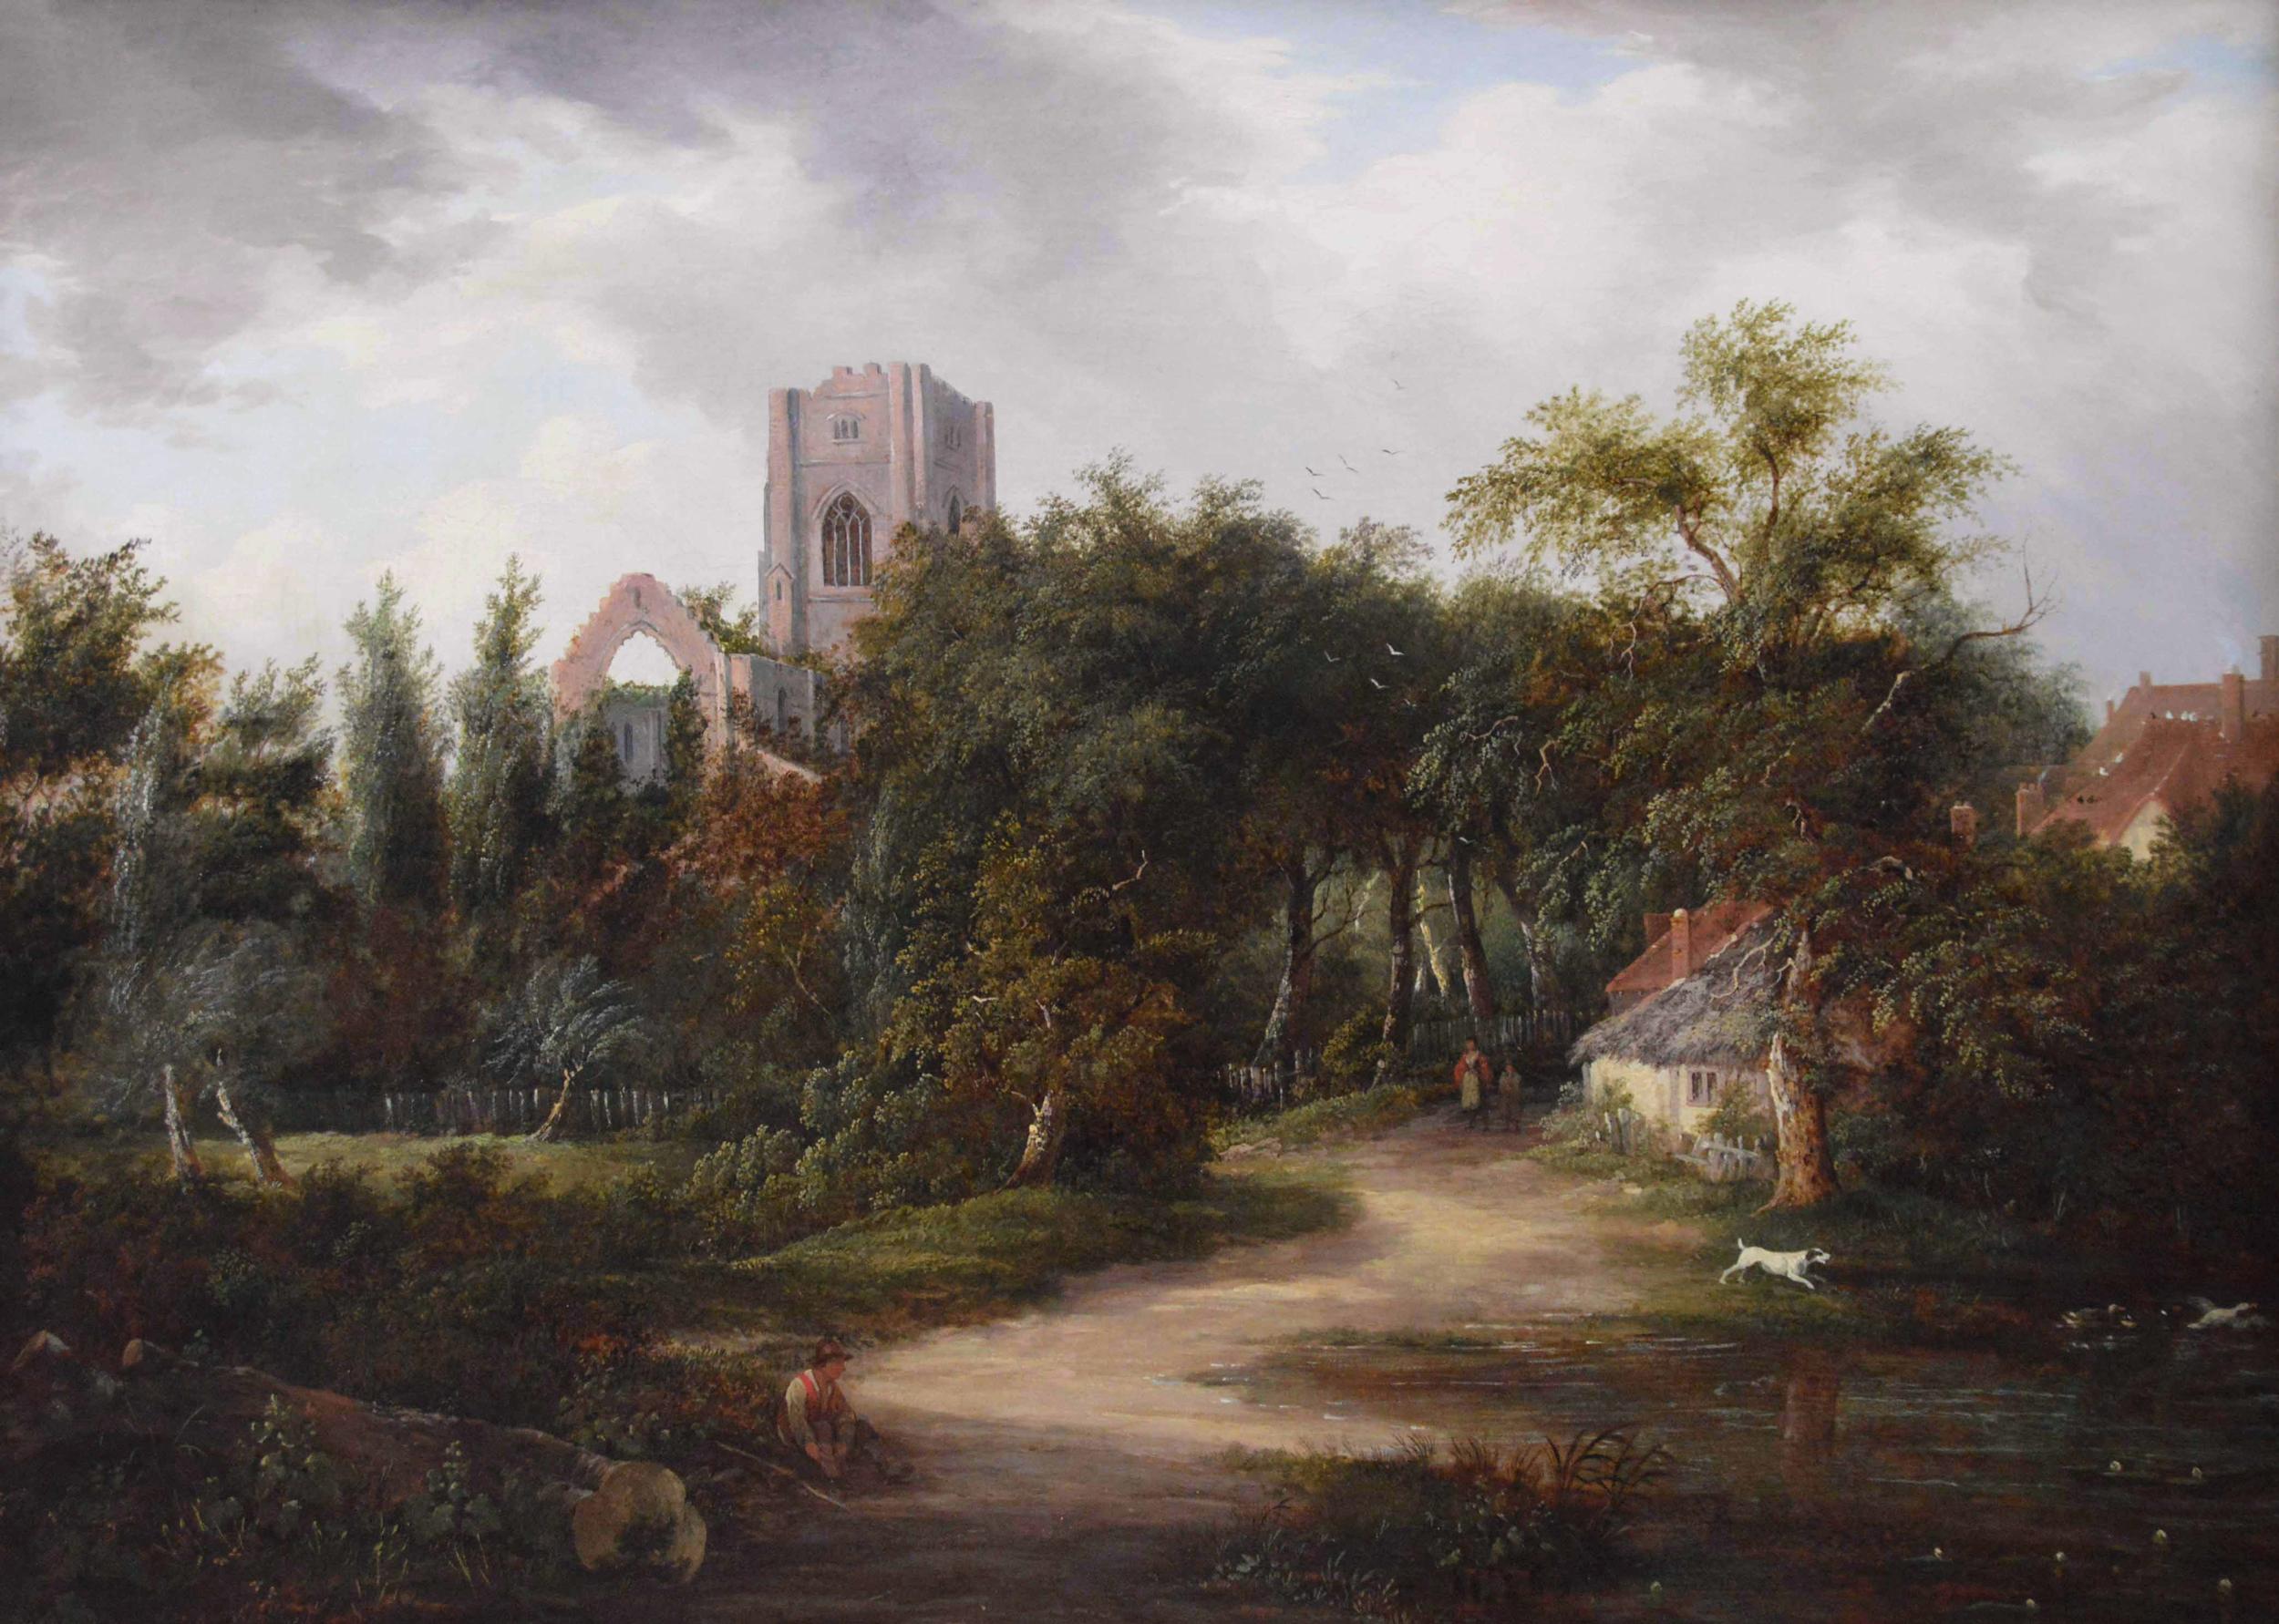 19th Century landscape oil painting of figures in a lane near Abbey ruins  - Painting by Edward Williams